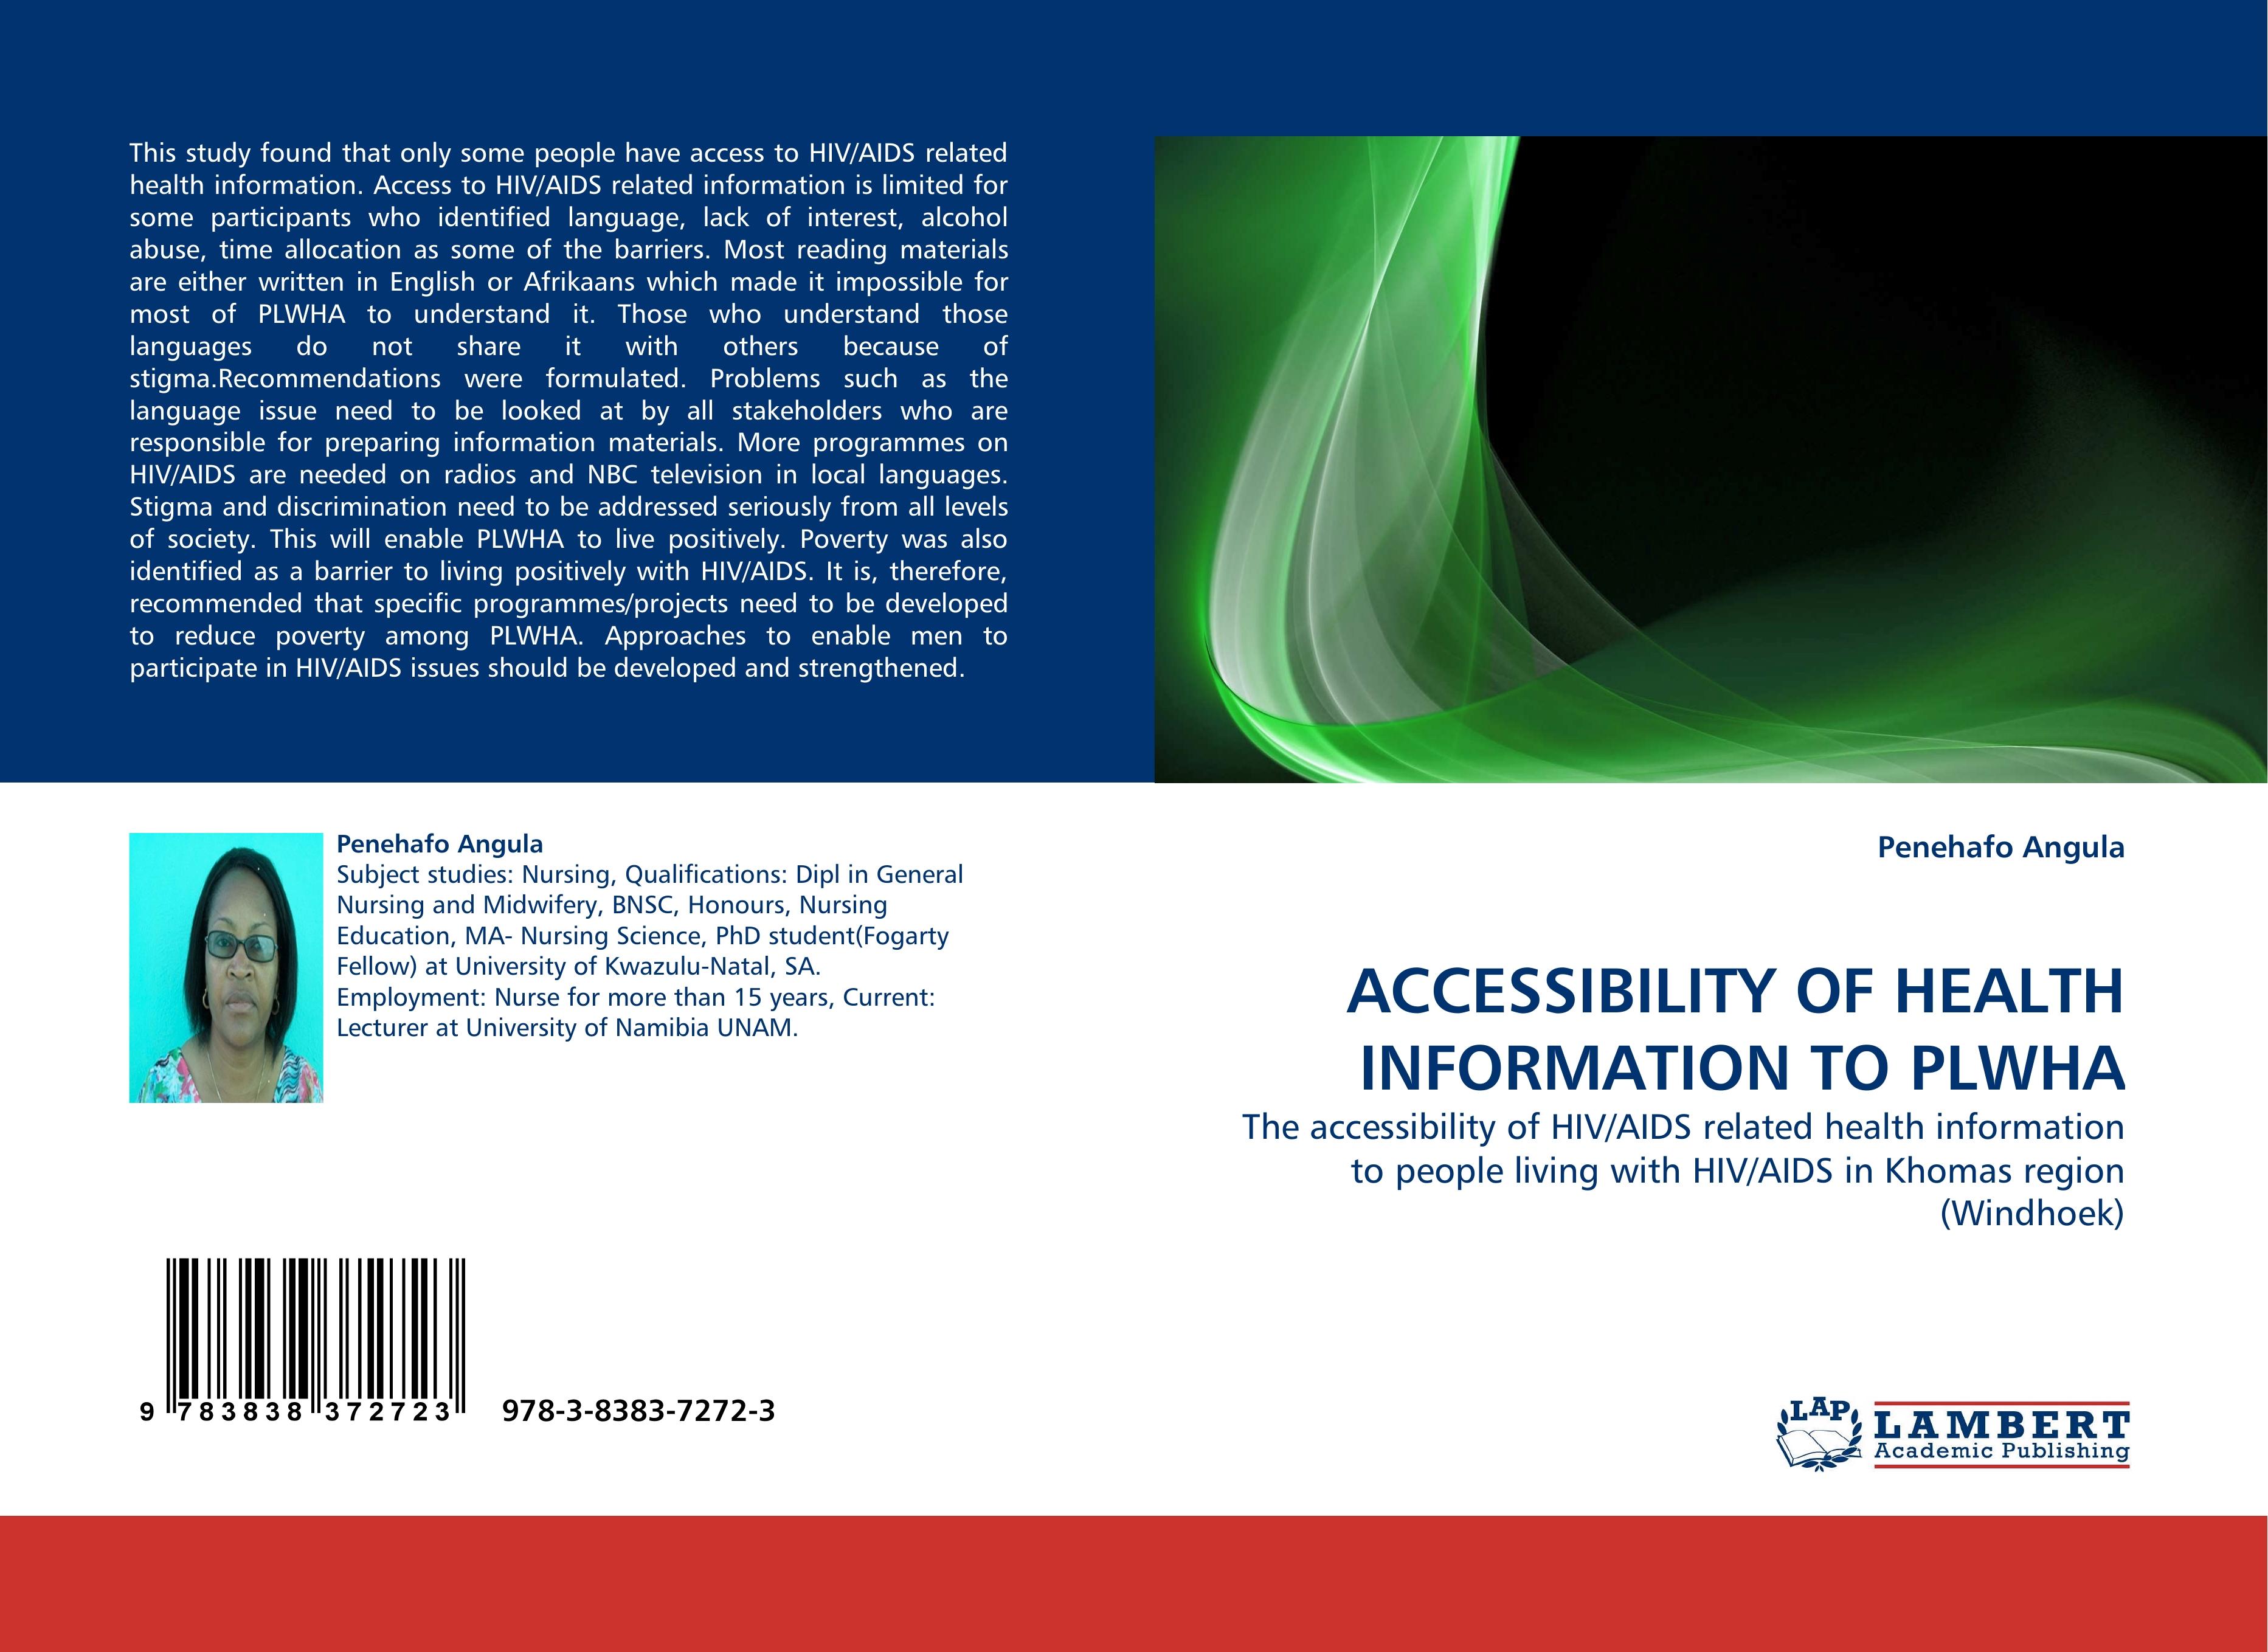 ACCESSIBILITY OF HEALTH INFORMATION TO PLWHA / The accessibility of HIV/AIDS related health information to people living with HIV/AIDS in Khomas region (Windhoek) / Penehafo Angula / Taschenbuch - Angula, Penehafo